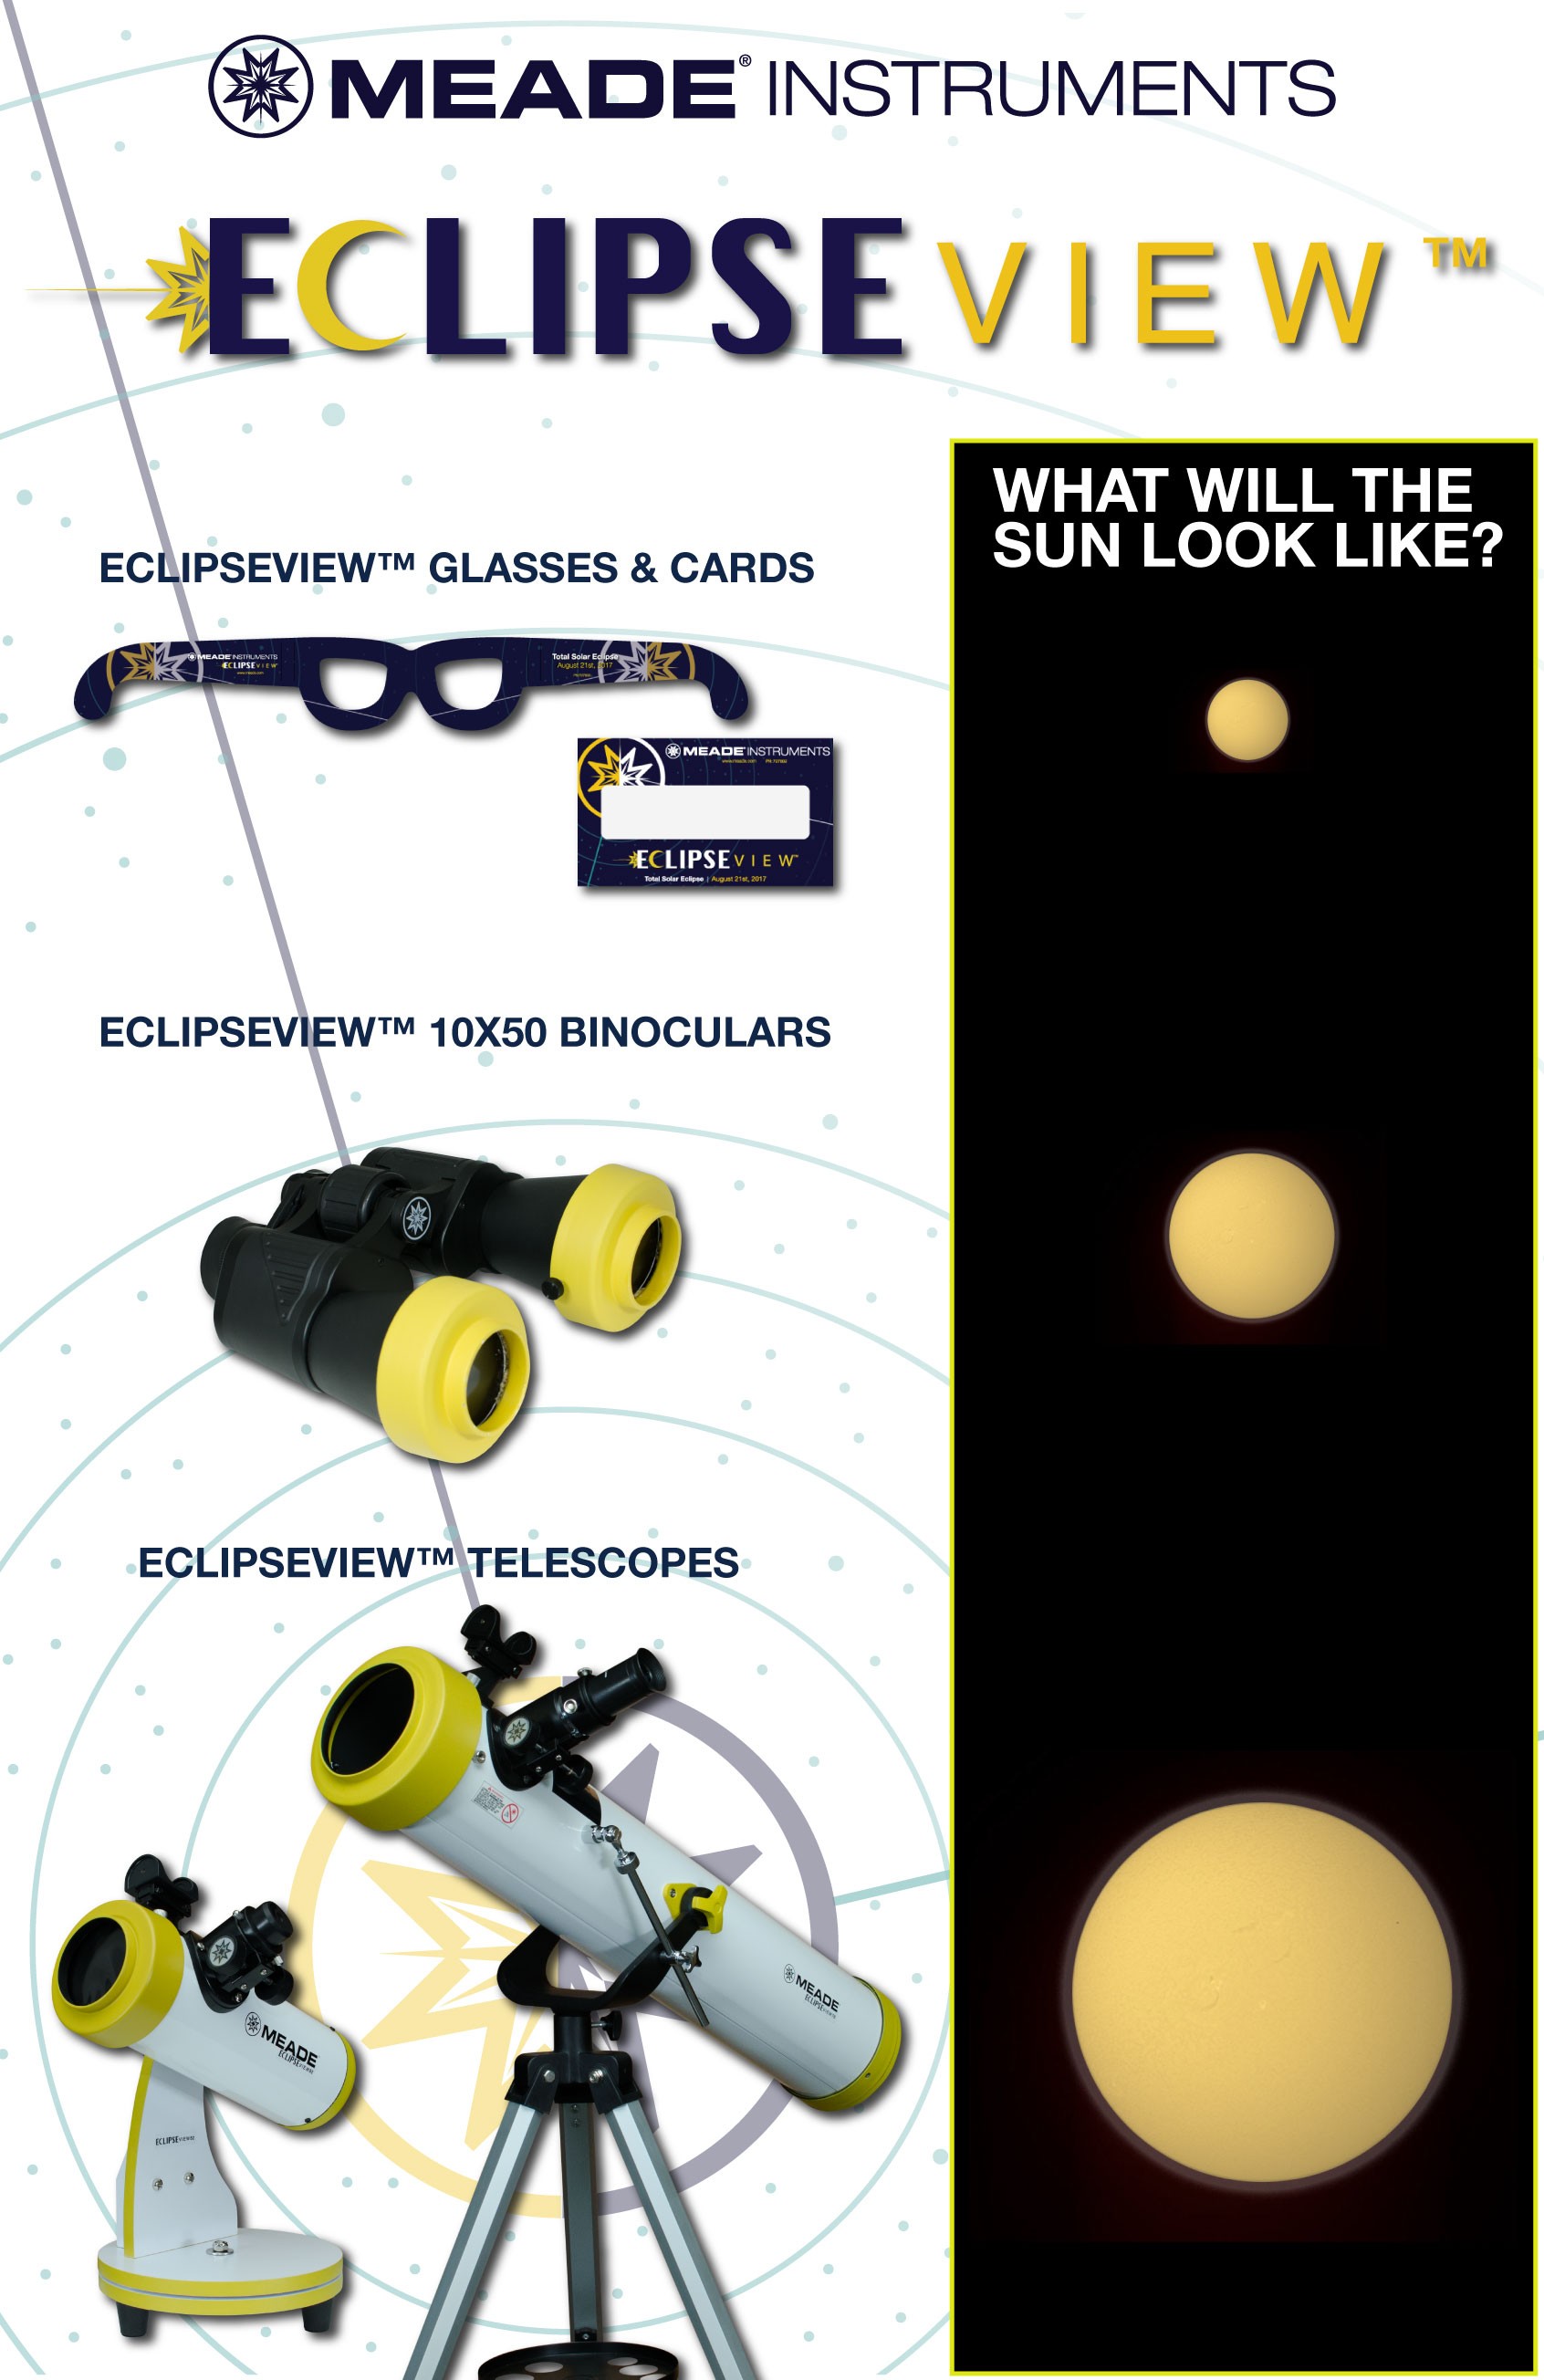 What will the sun look like?